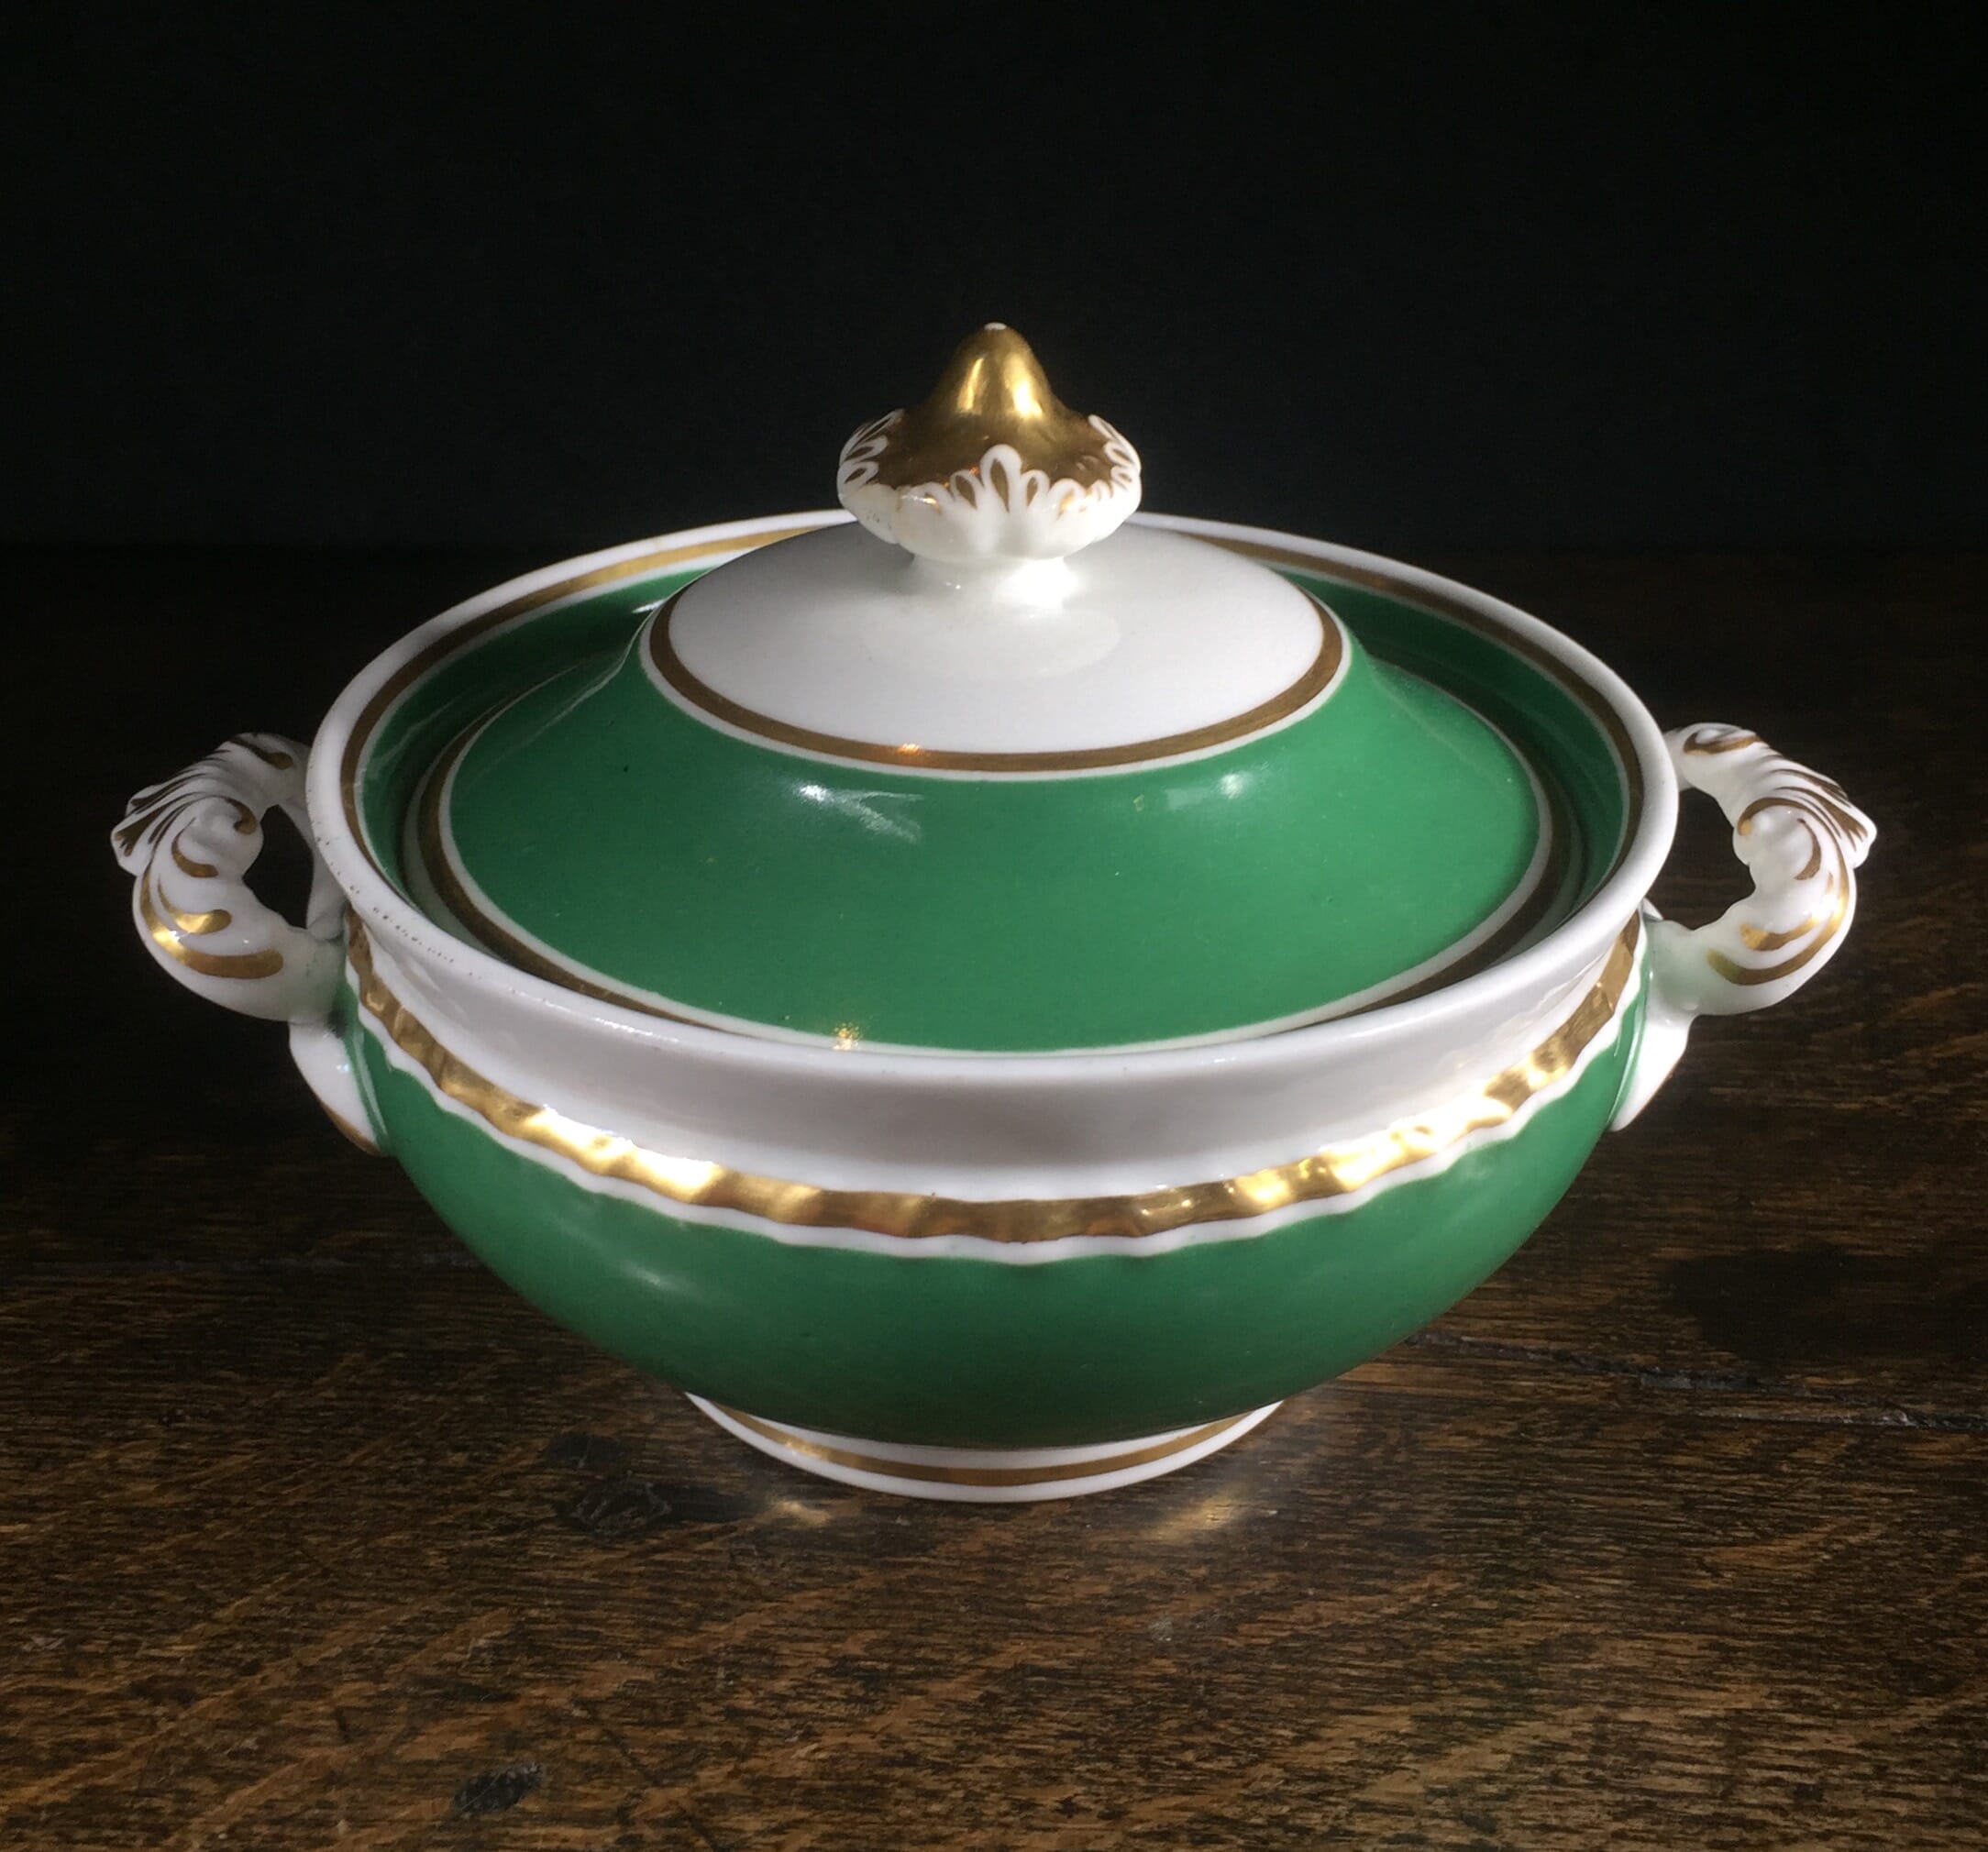 Chamberlains Worcester sugar bowl in green with gold detail. Marked 1816-40-0